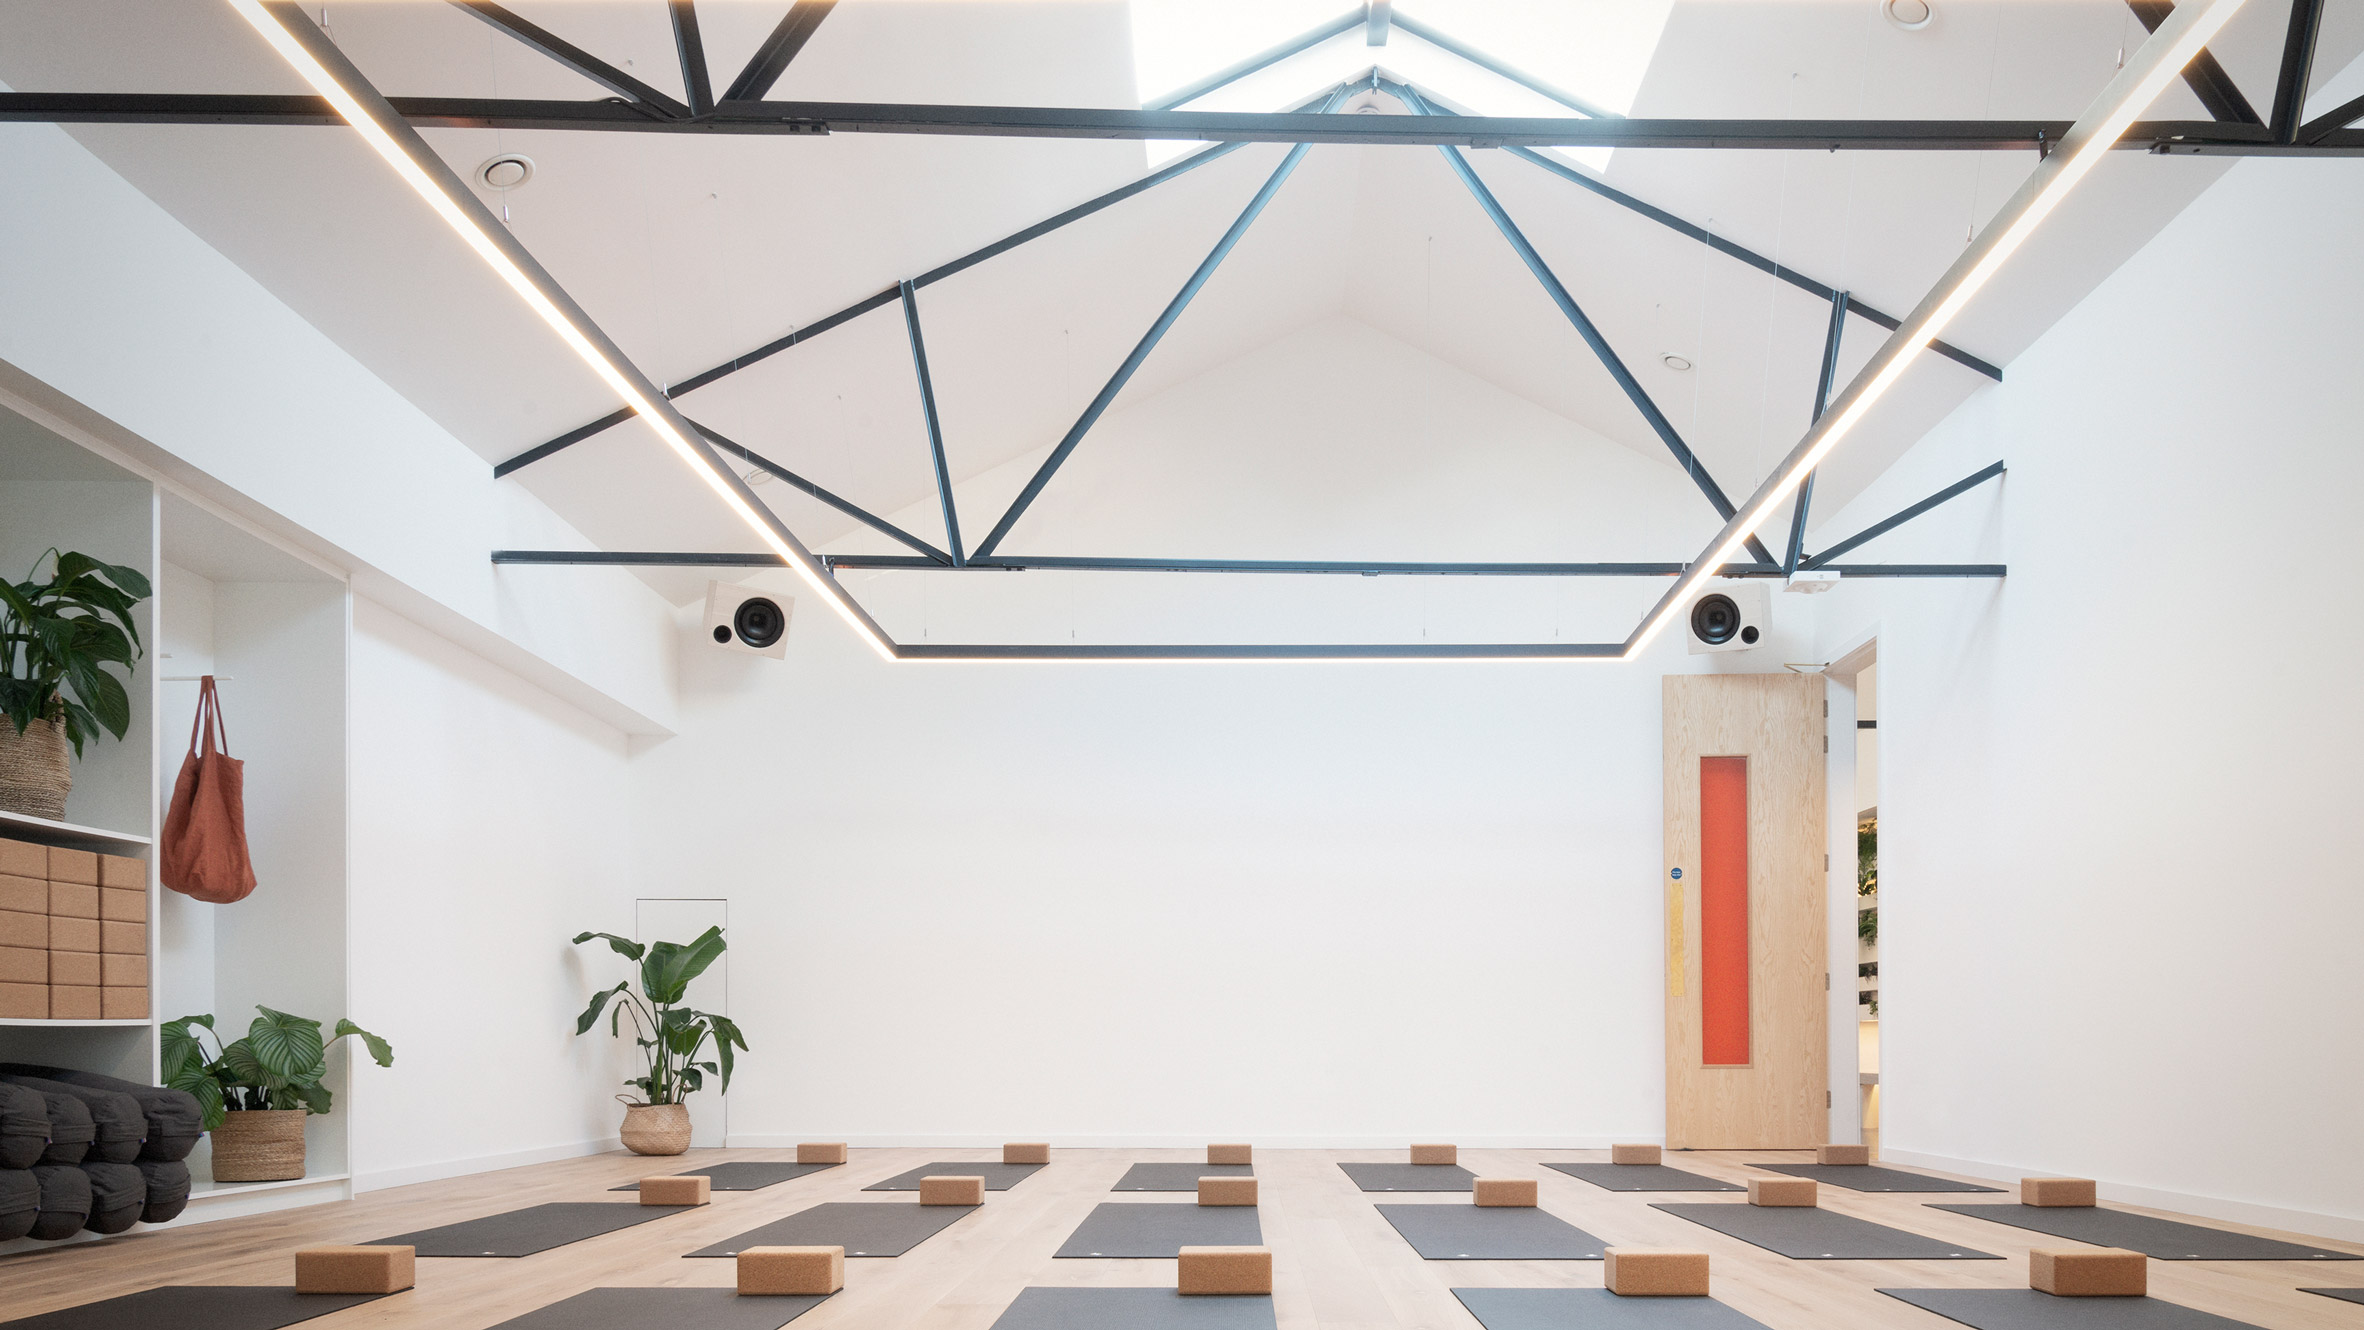 Yoga poses inspire interiors of Dublin's The Space Between